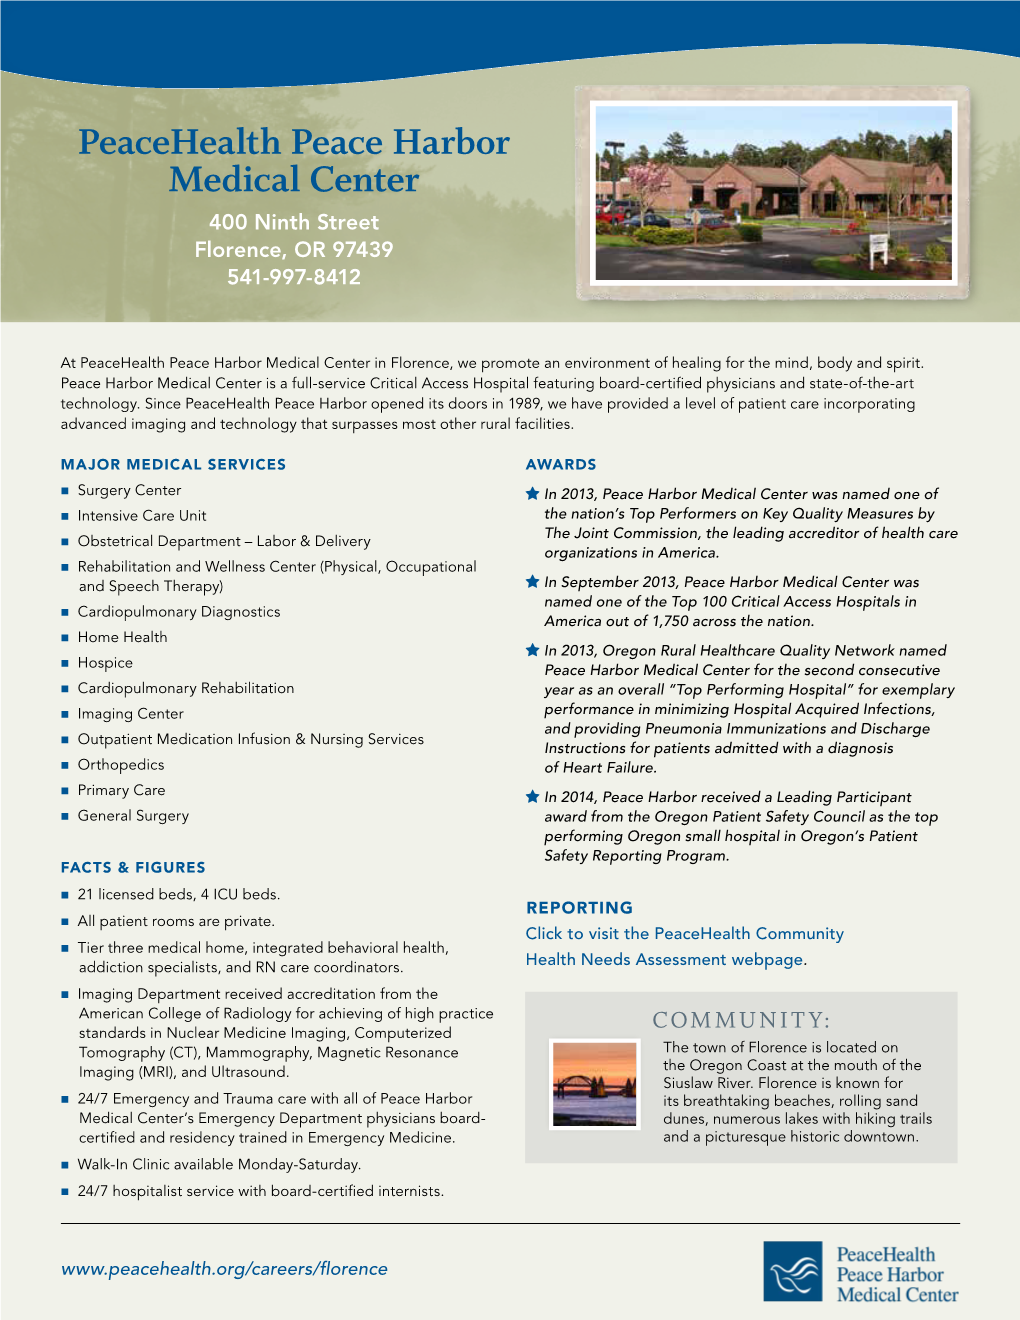 Peacehealth Peace Harbor Medical Center 400 Ninth Street Florence, OR 97439 541-997-8412